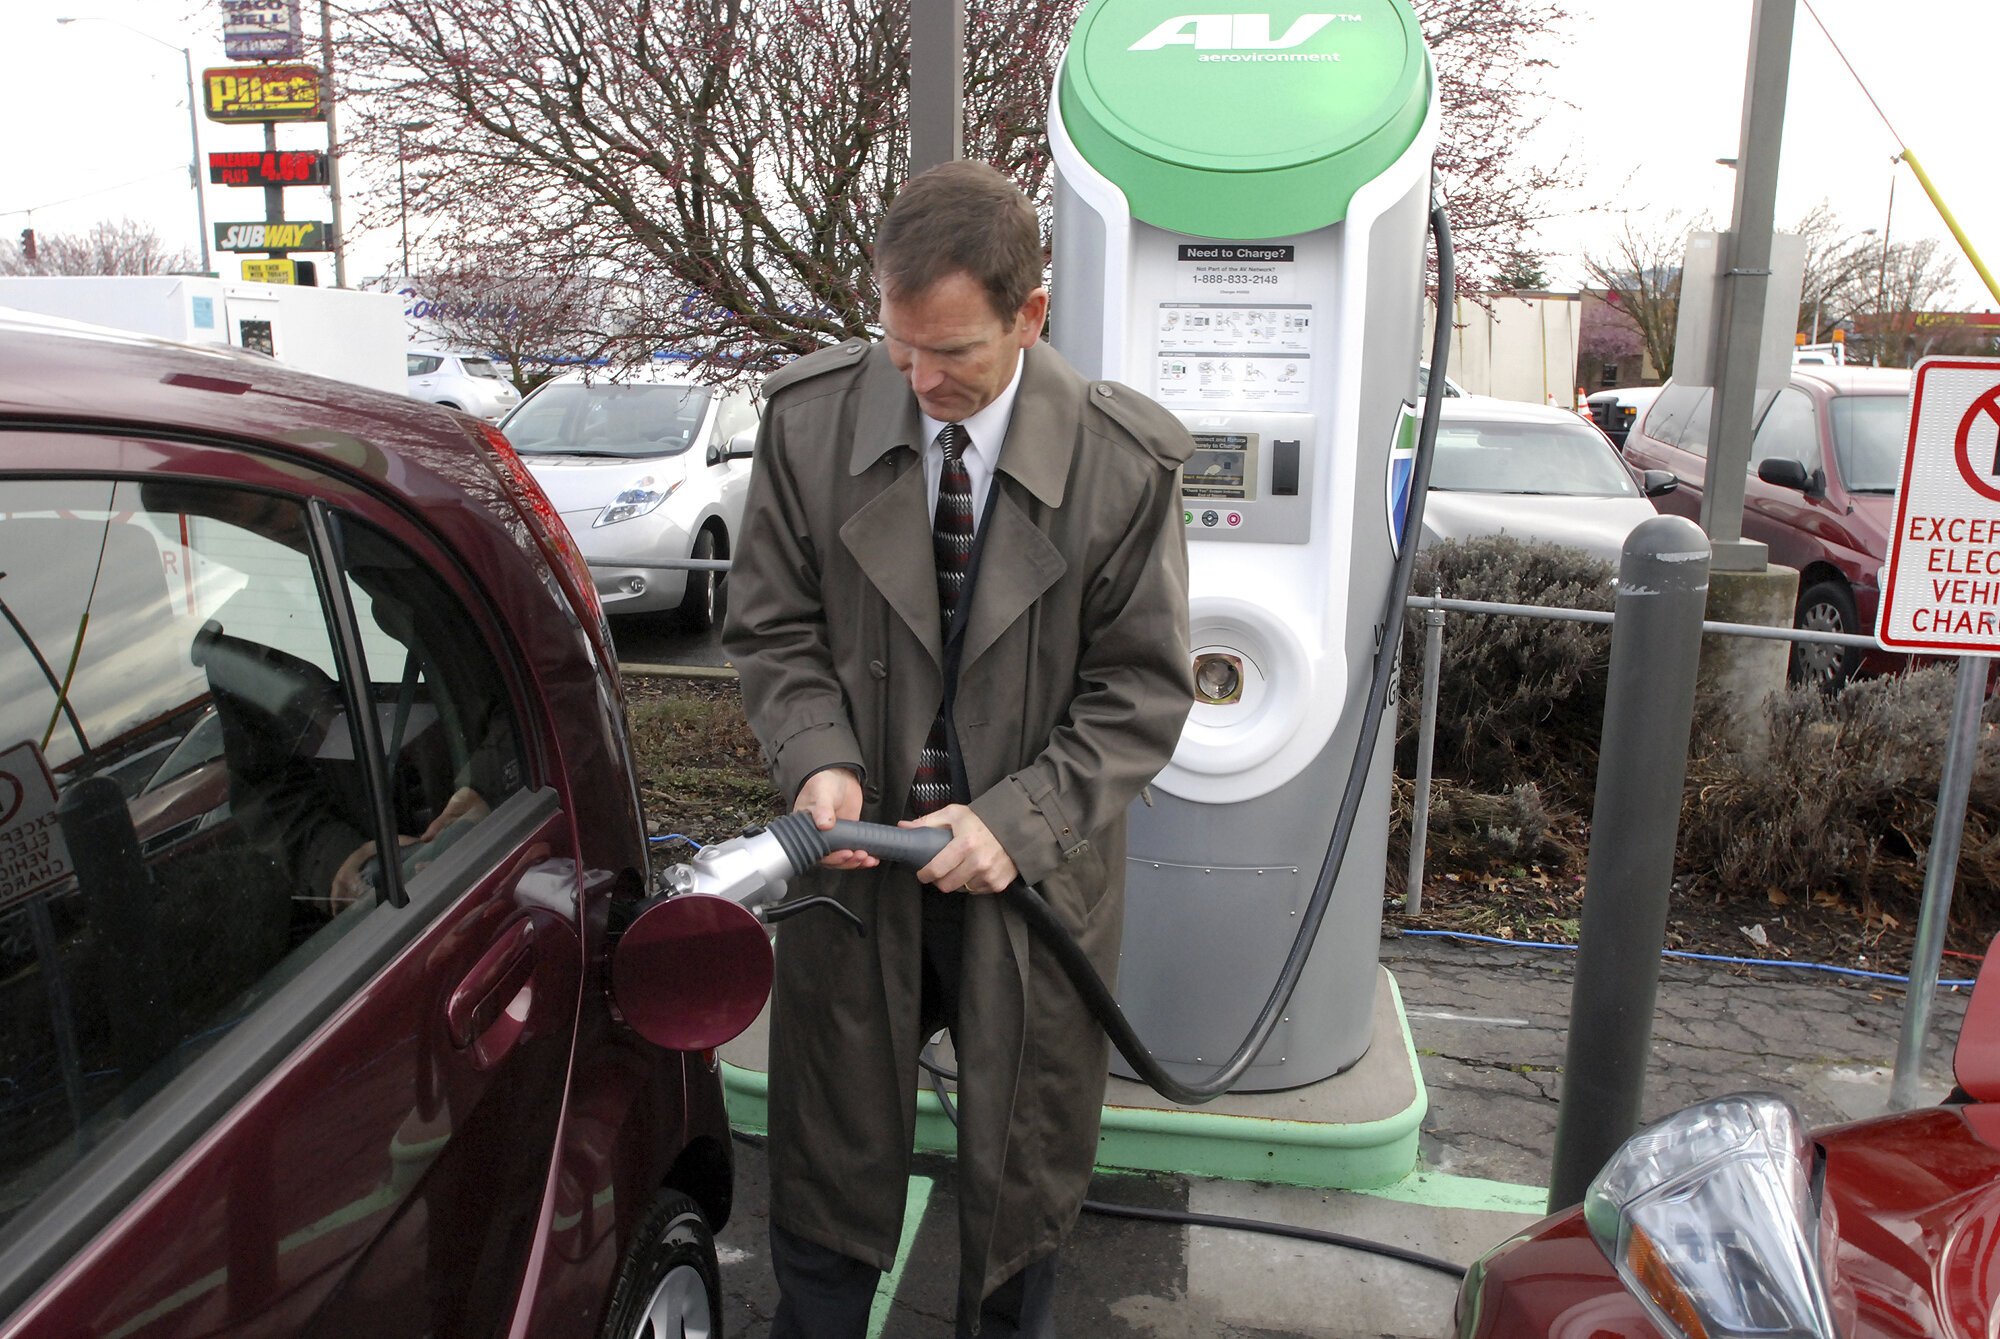 Major automakers unite to build electric vehicle charging network they say will rival Tesla’s